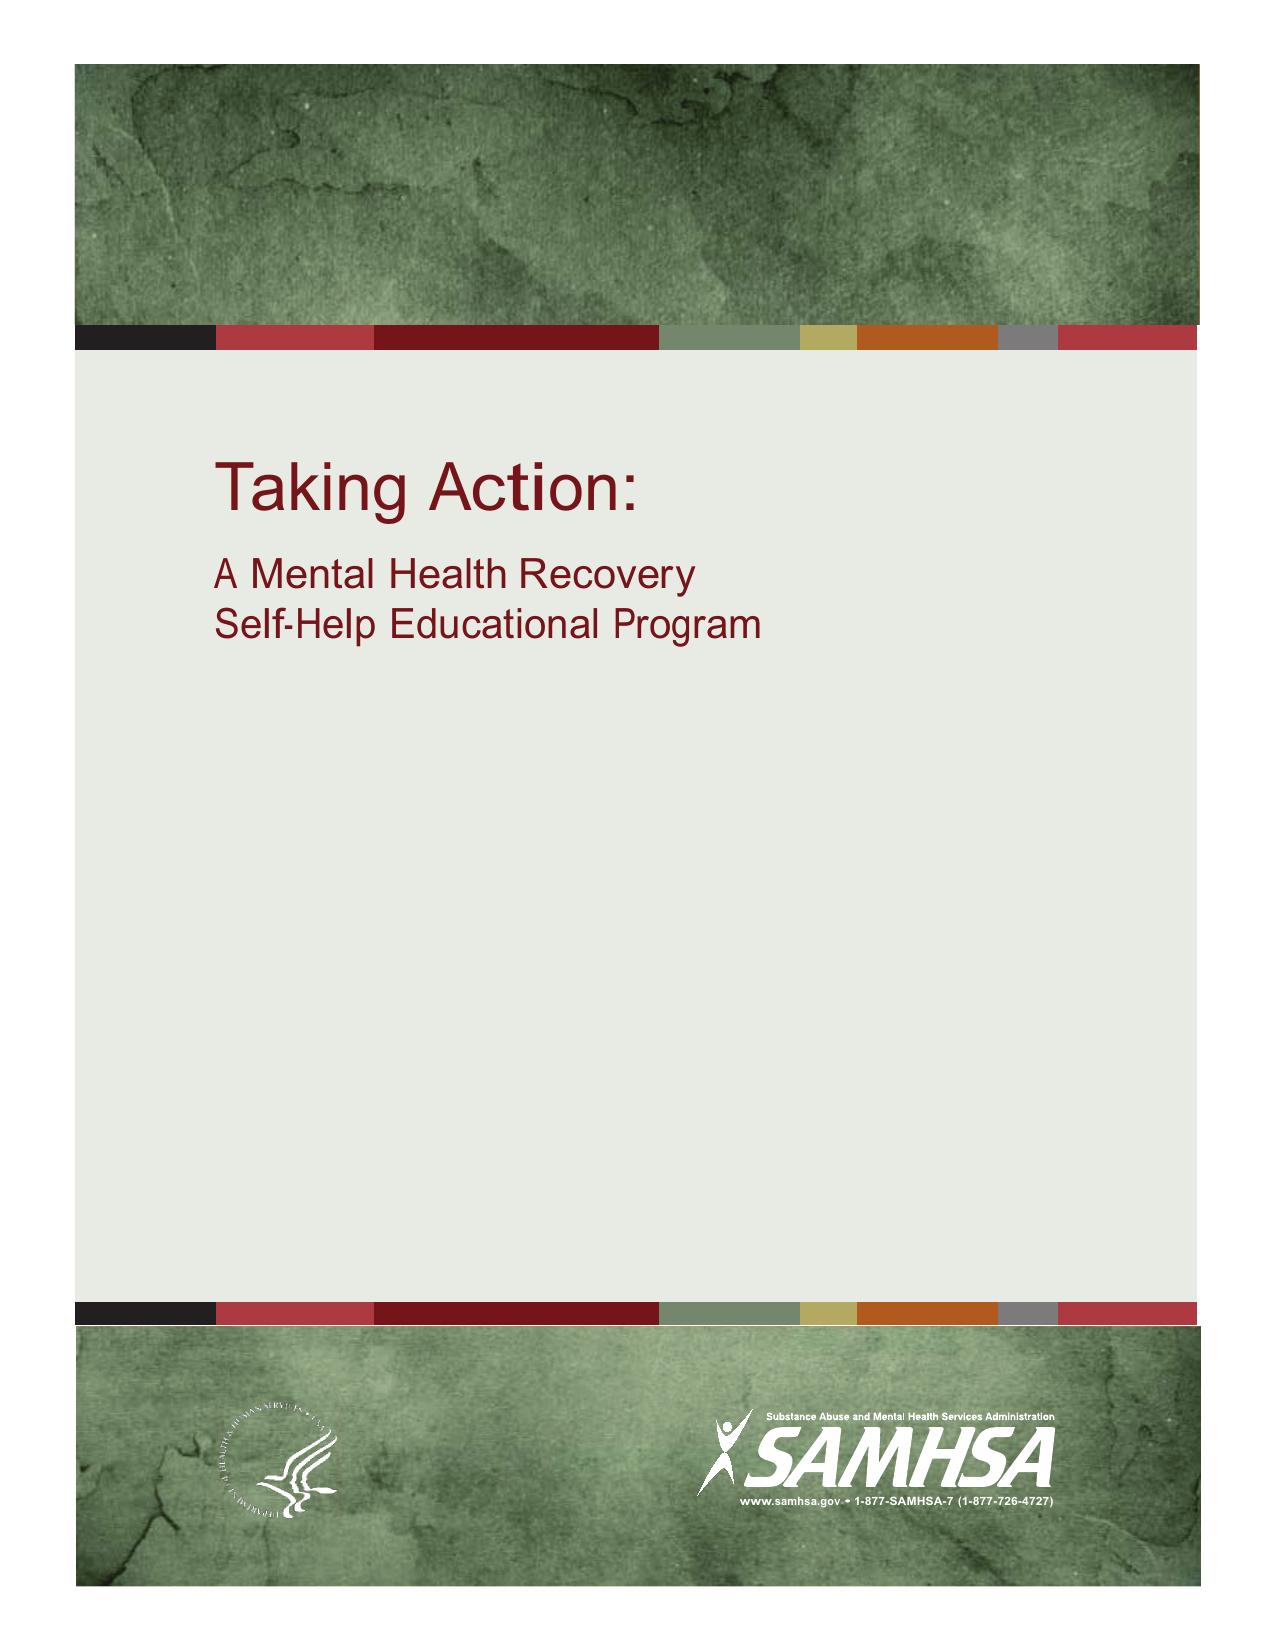 Taking Action: A Mental Health Recovery Self-Help Educational Program